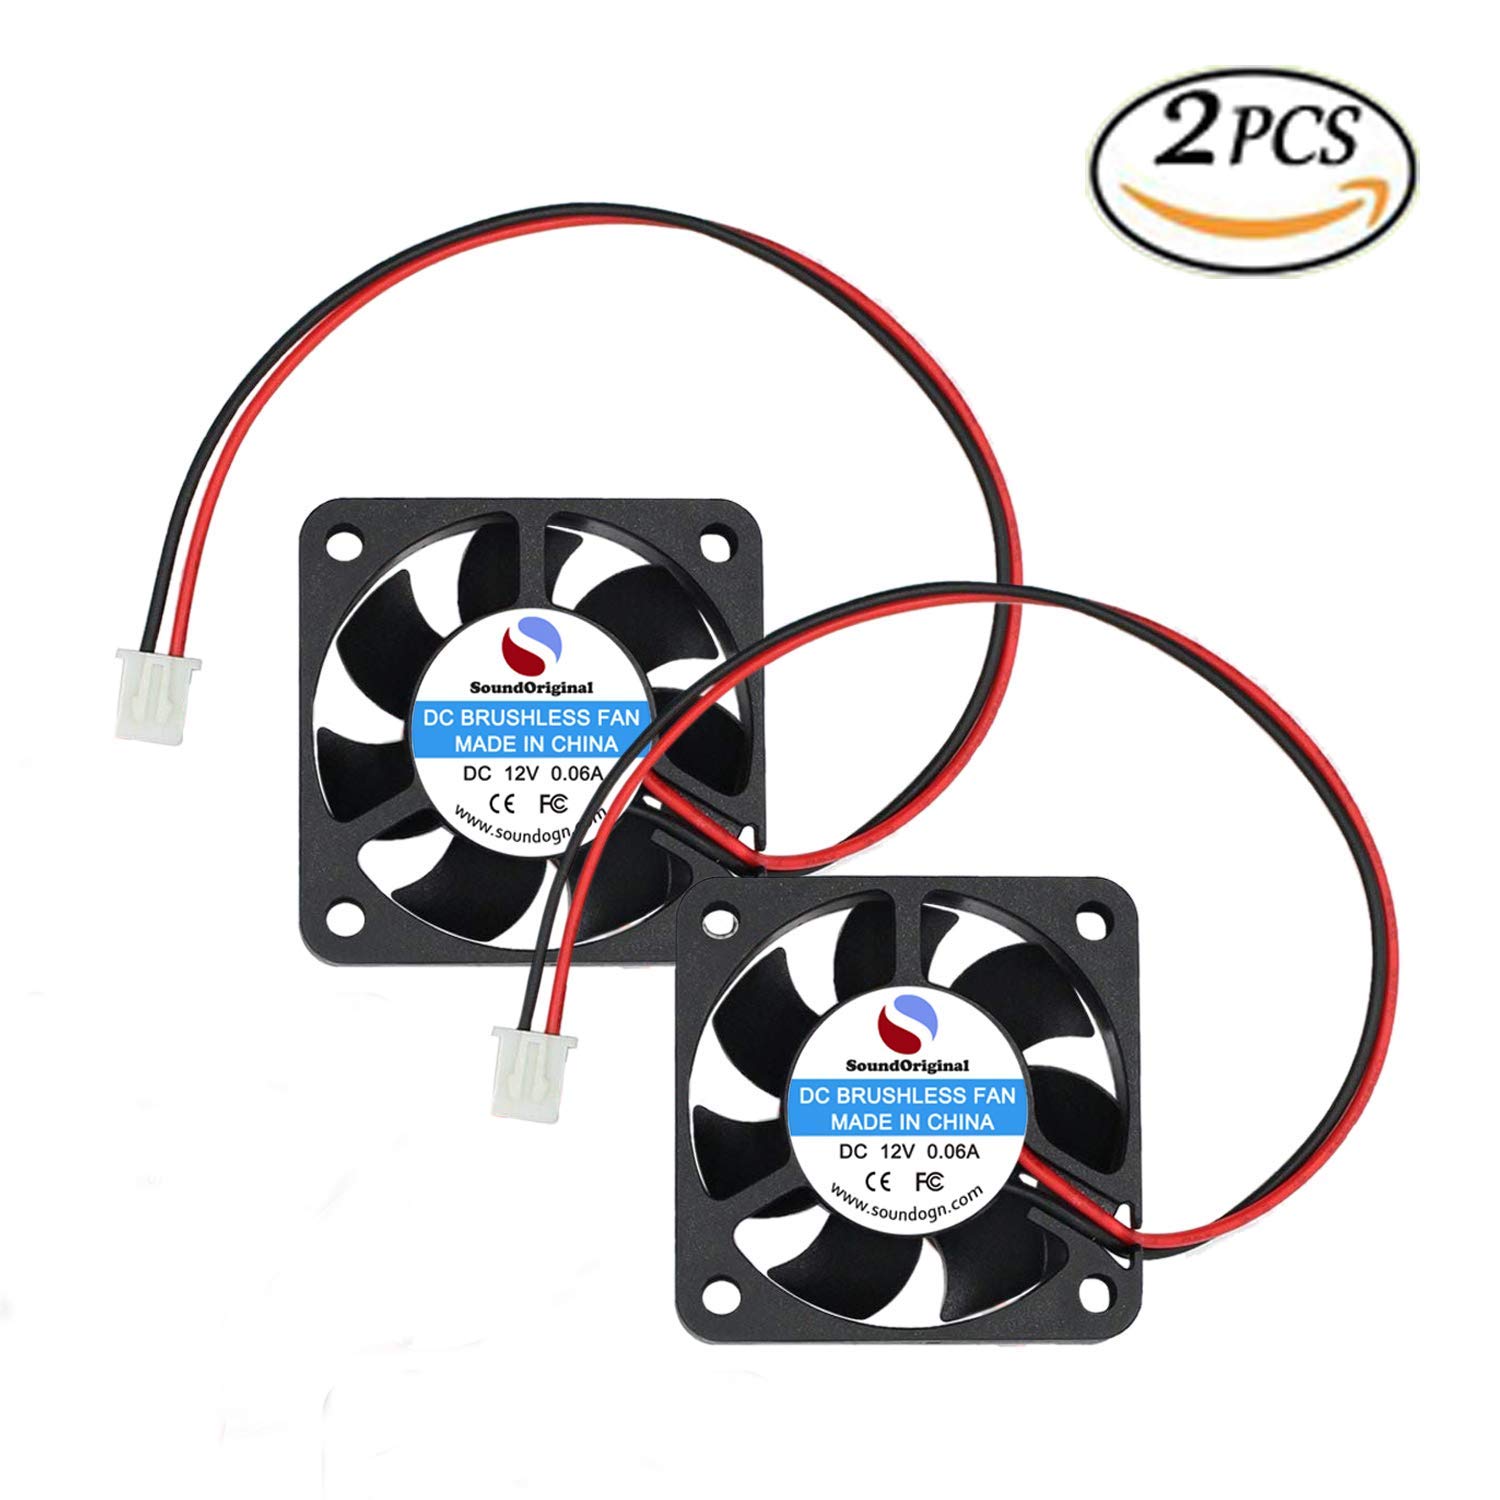 SoundOriginal 2pcs 4010 Brushless DC Cooling Fan 12V 0.06A 40x40x10mm Speed 6800 RPM Fans for Computer case 3D Printer Humidifier and Other Small Appliances Series Repair Replacement